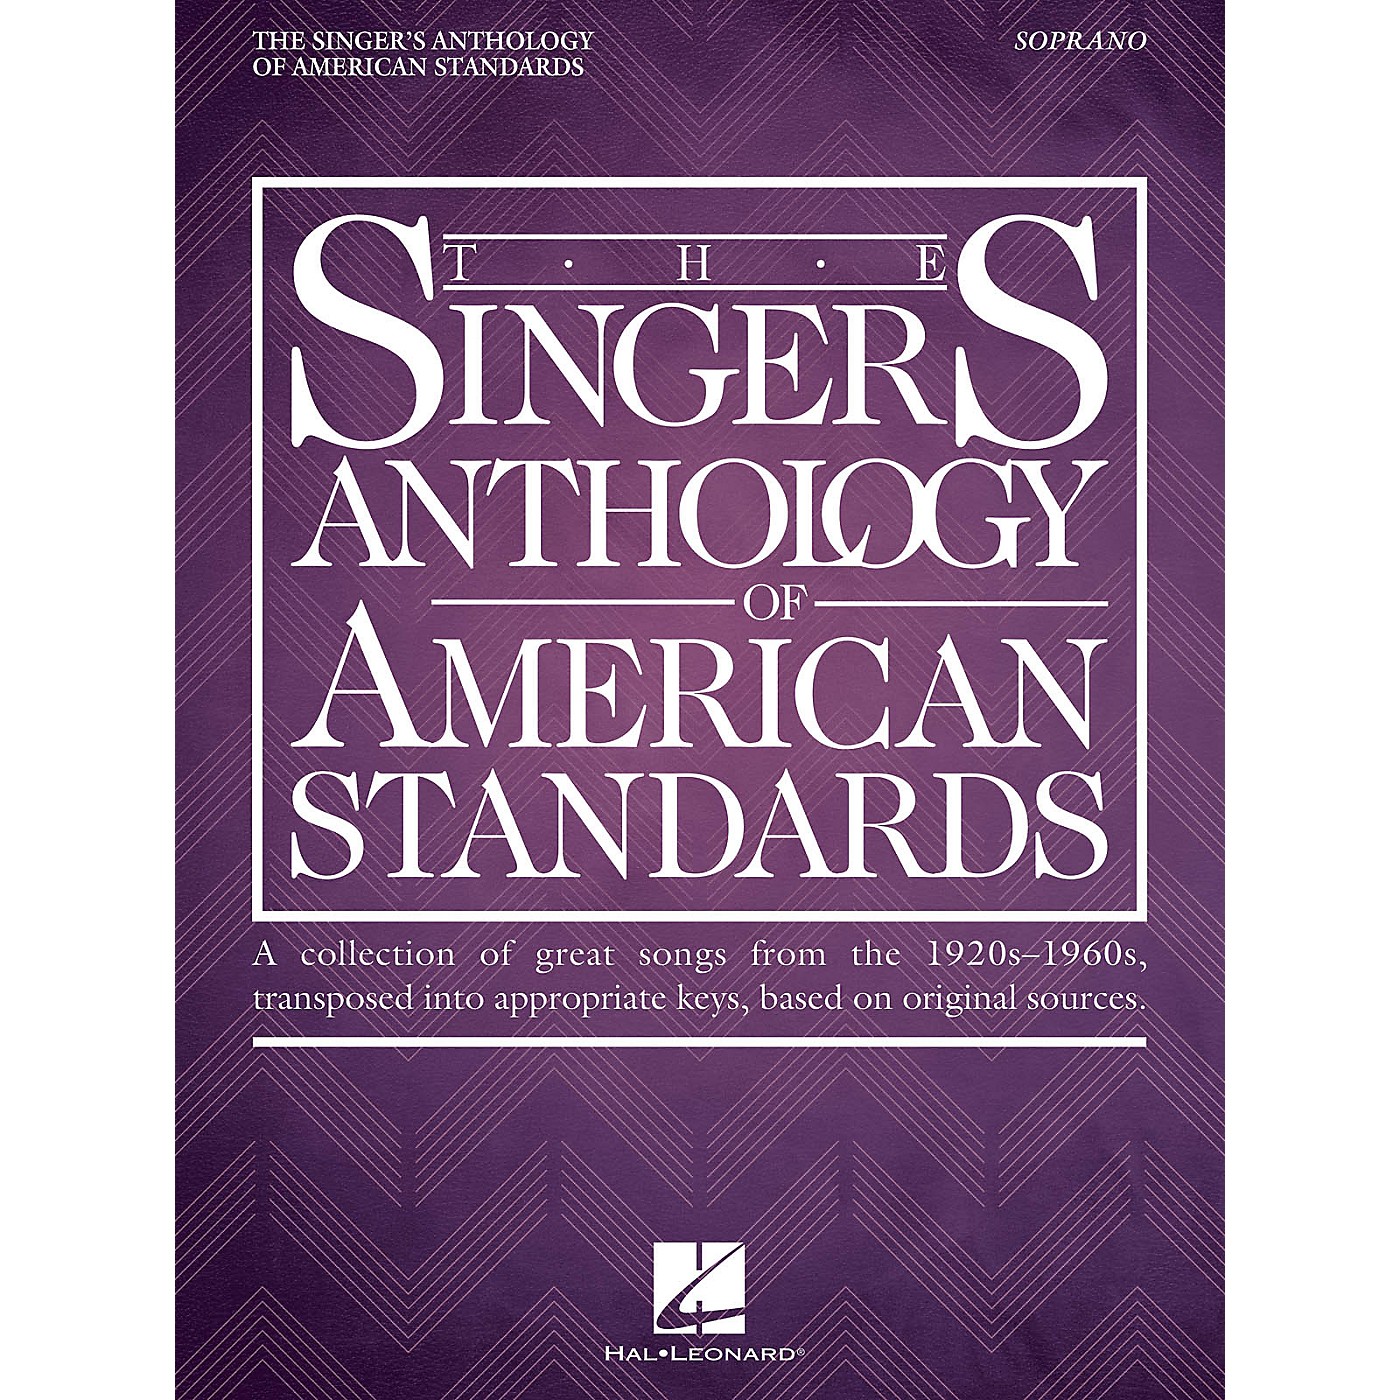 Hal Leonard The Singer's Anthology of American Standards Soprano Edition Vocal Songbook thumbnail